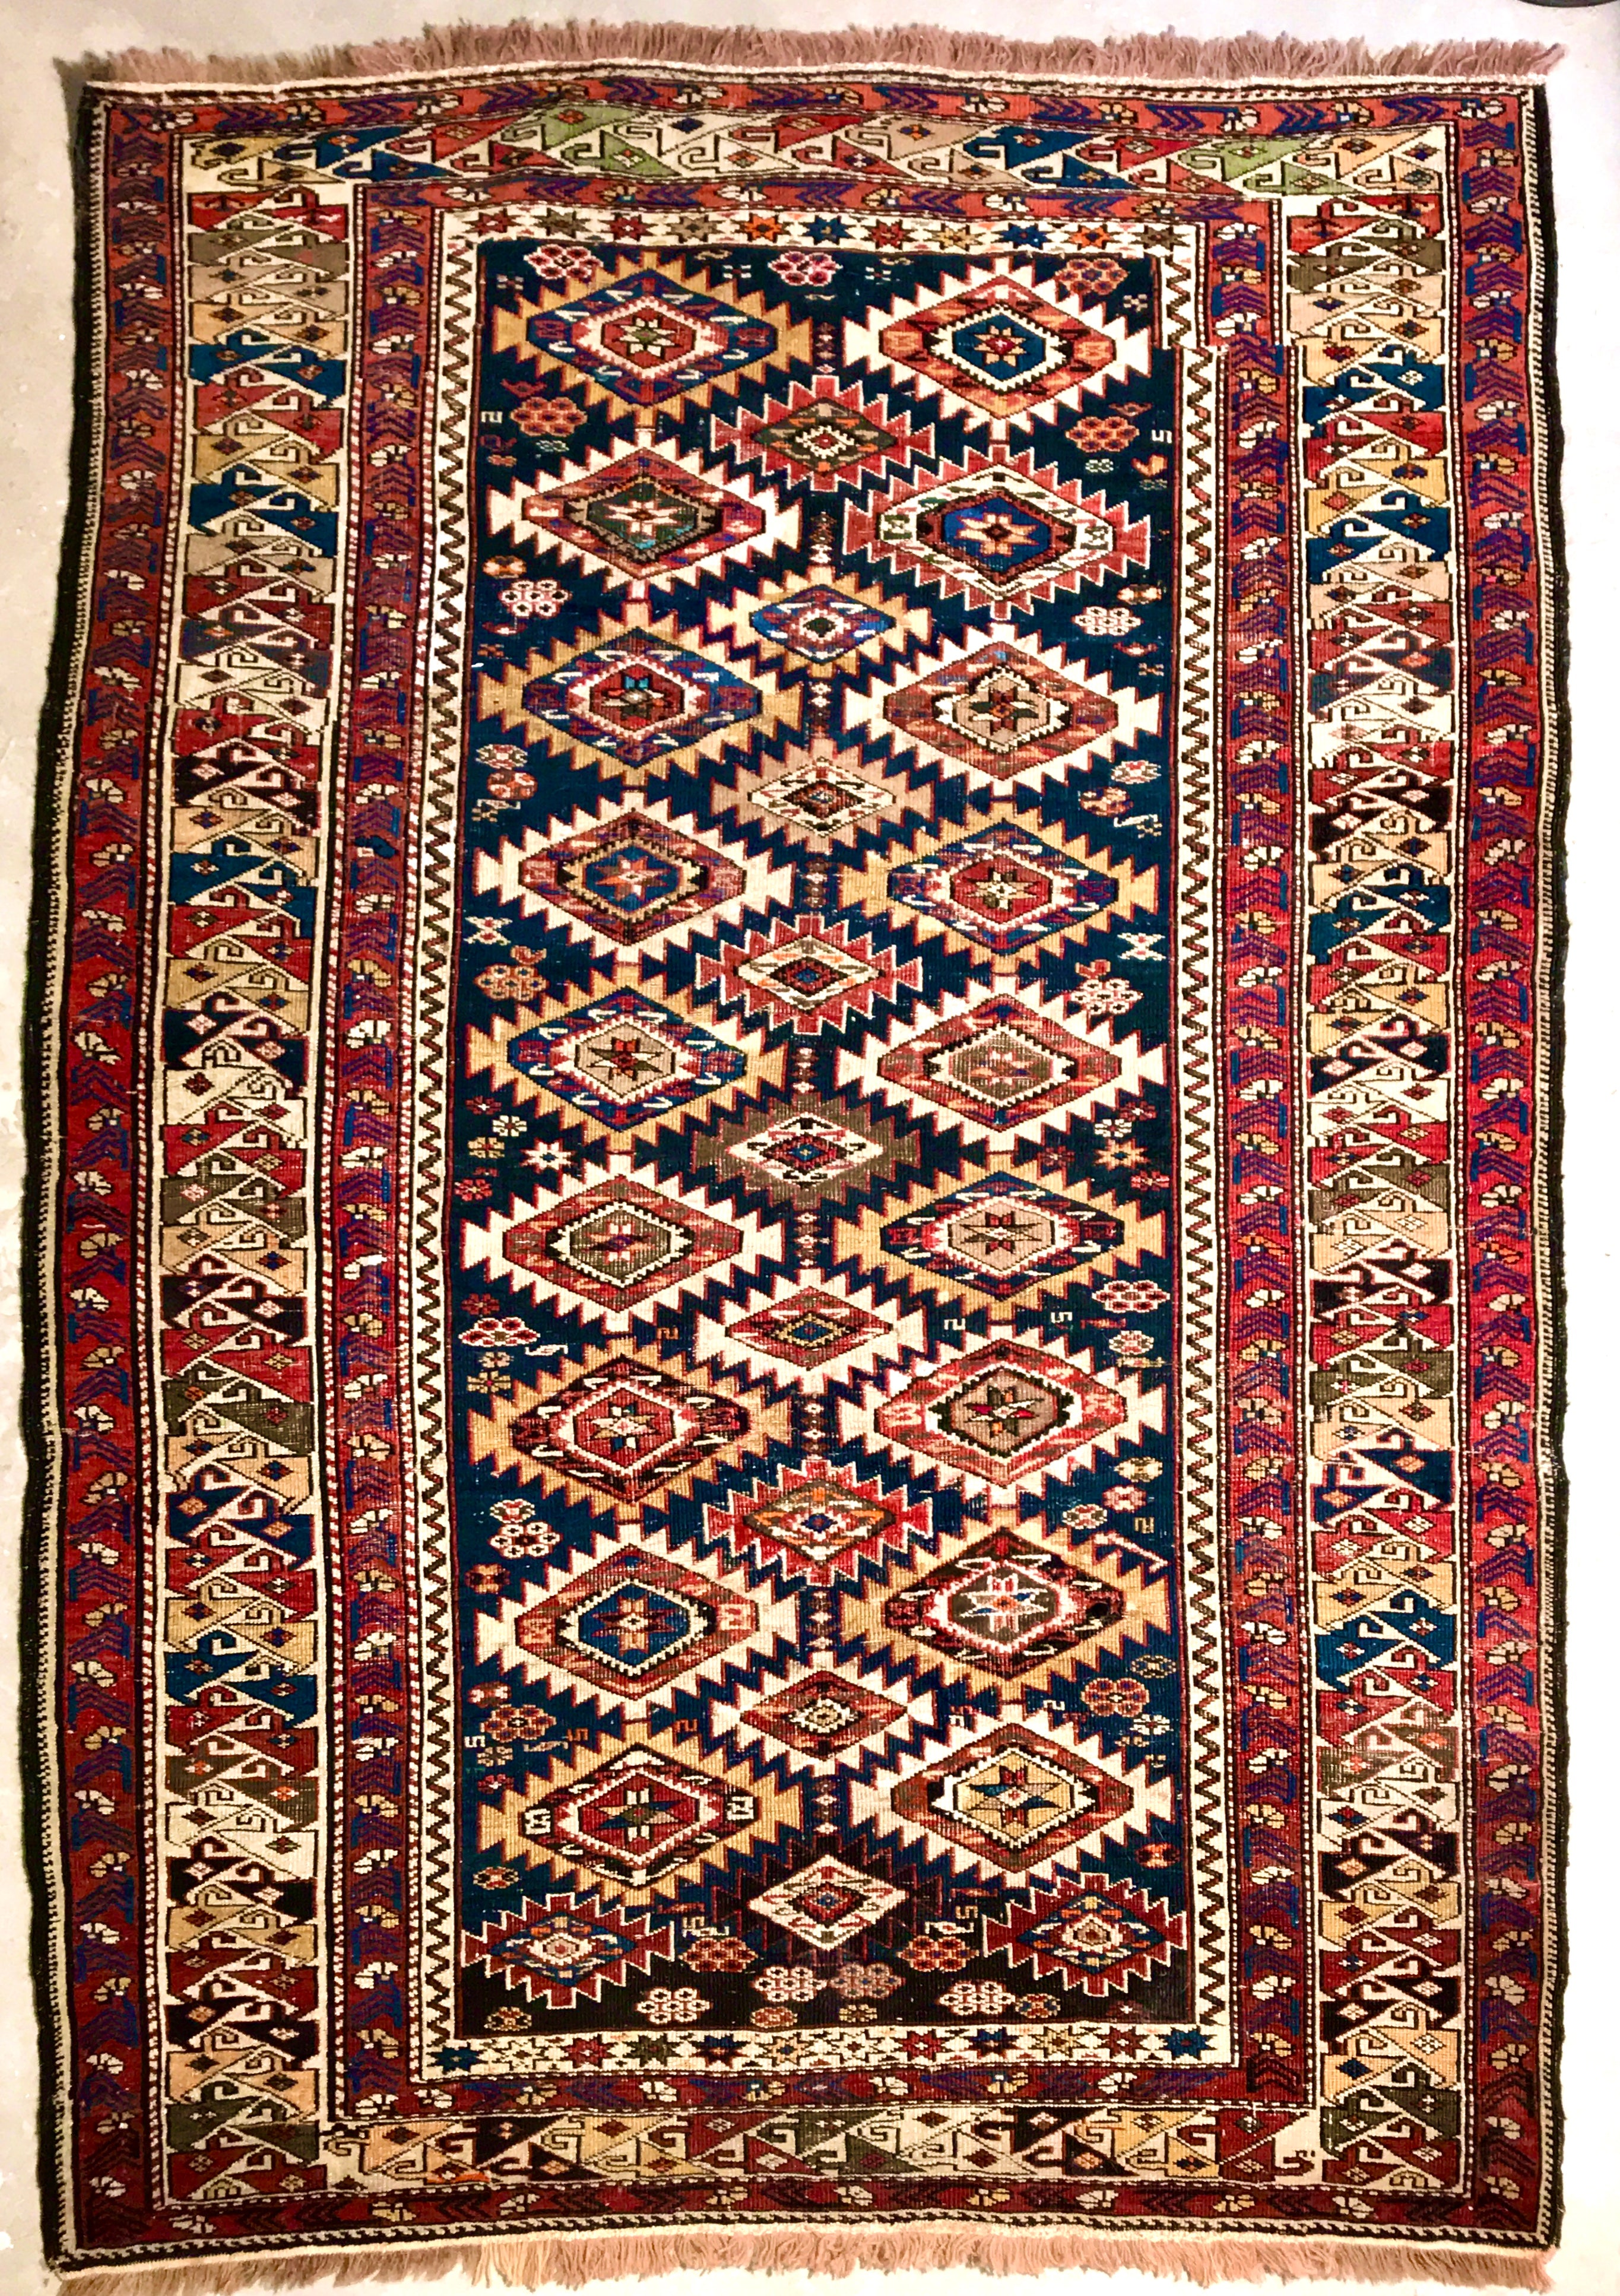 RUGS and CARPETS for Sale – APPLE BOUTIQUE